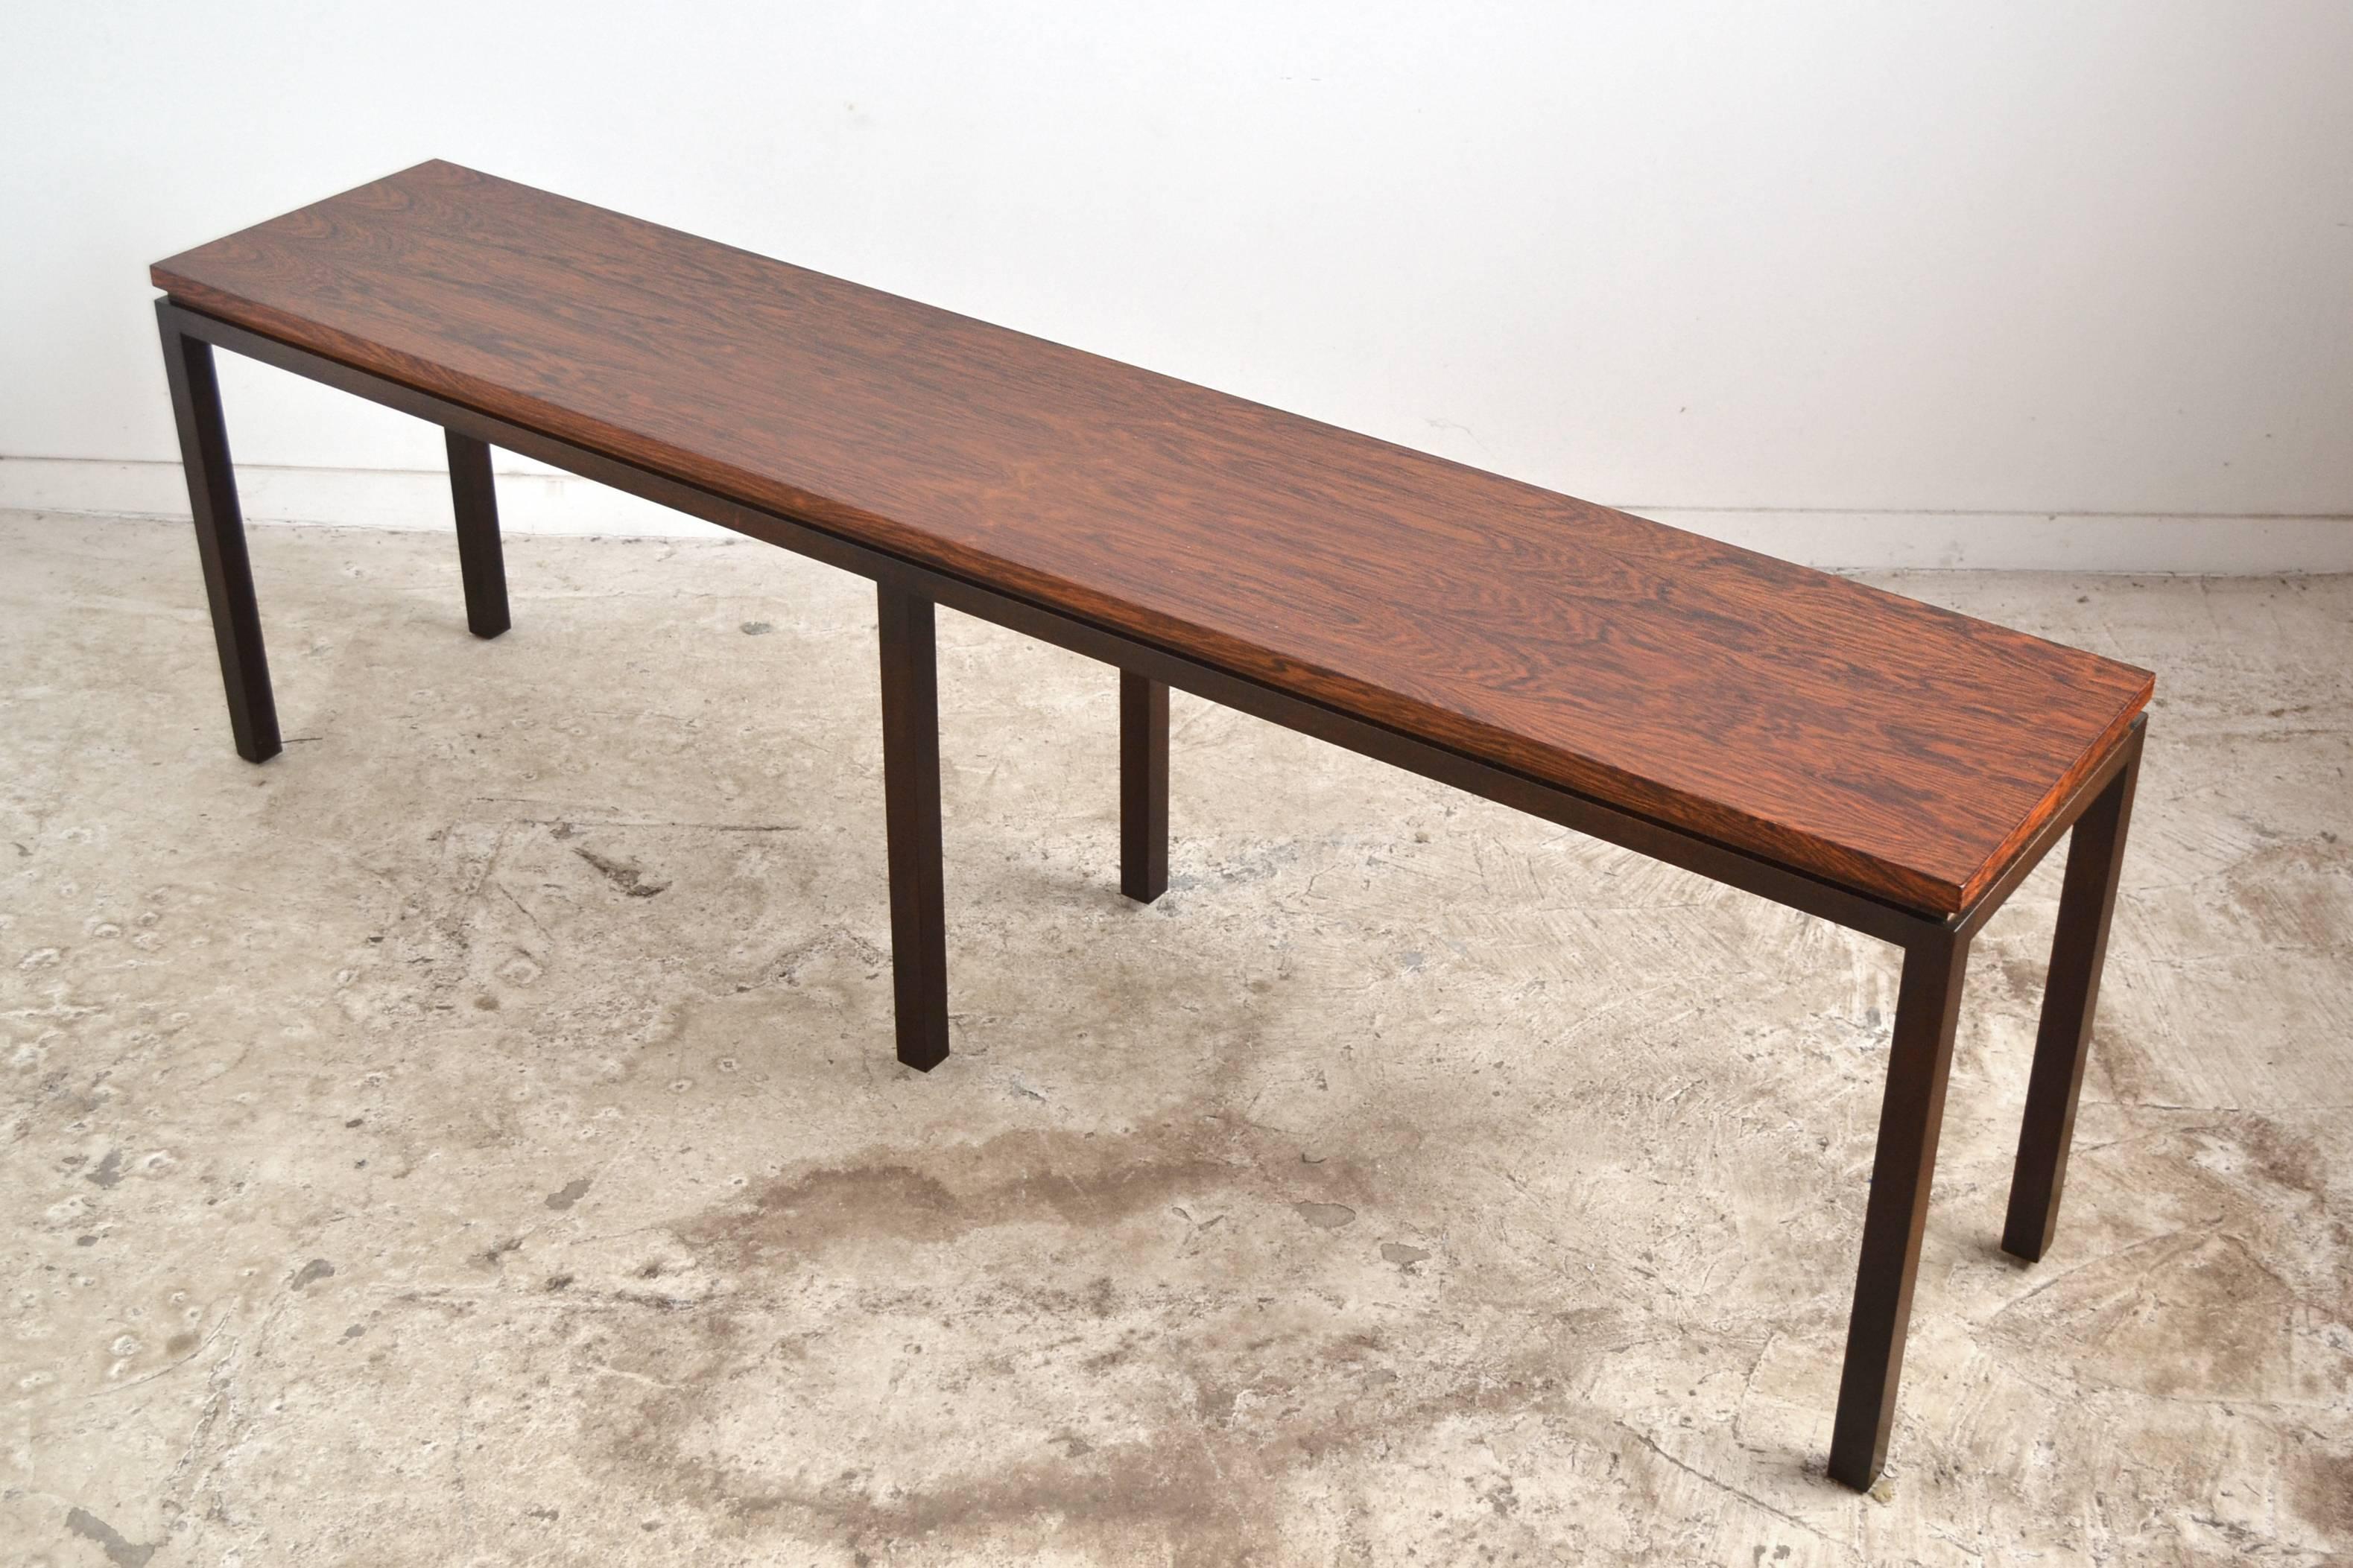 A long, lovely sofa or console table by Harvey Probber with a top of rich rosewood supported by a dark mahogany base.